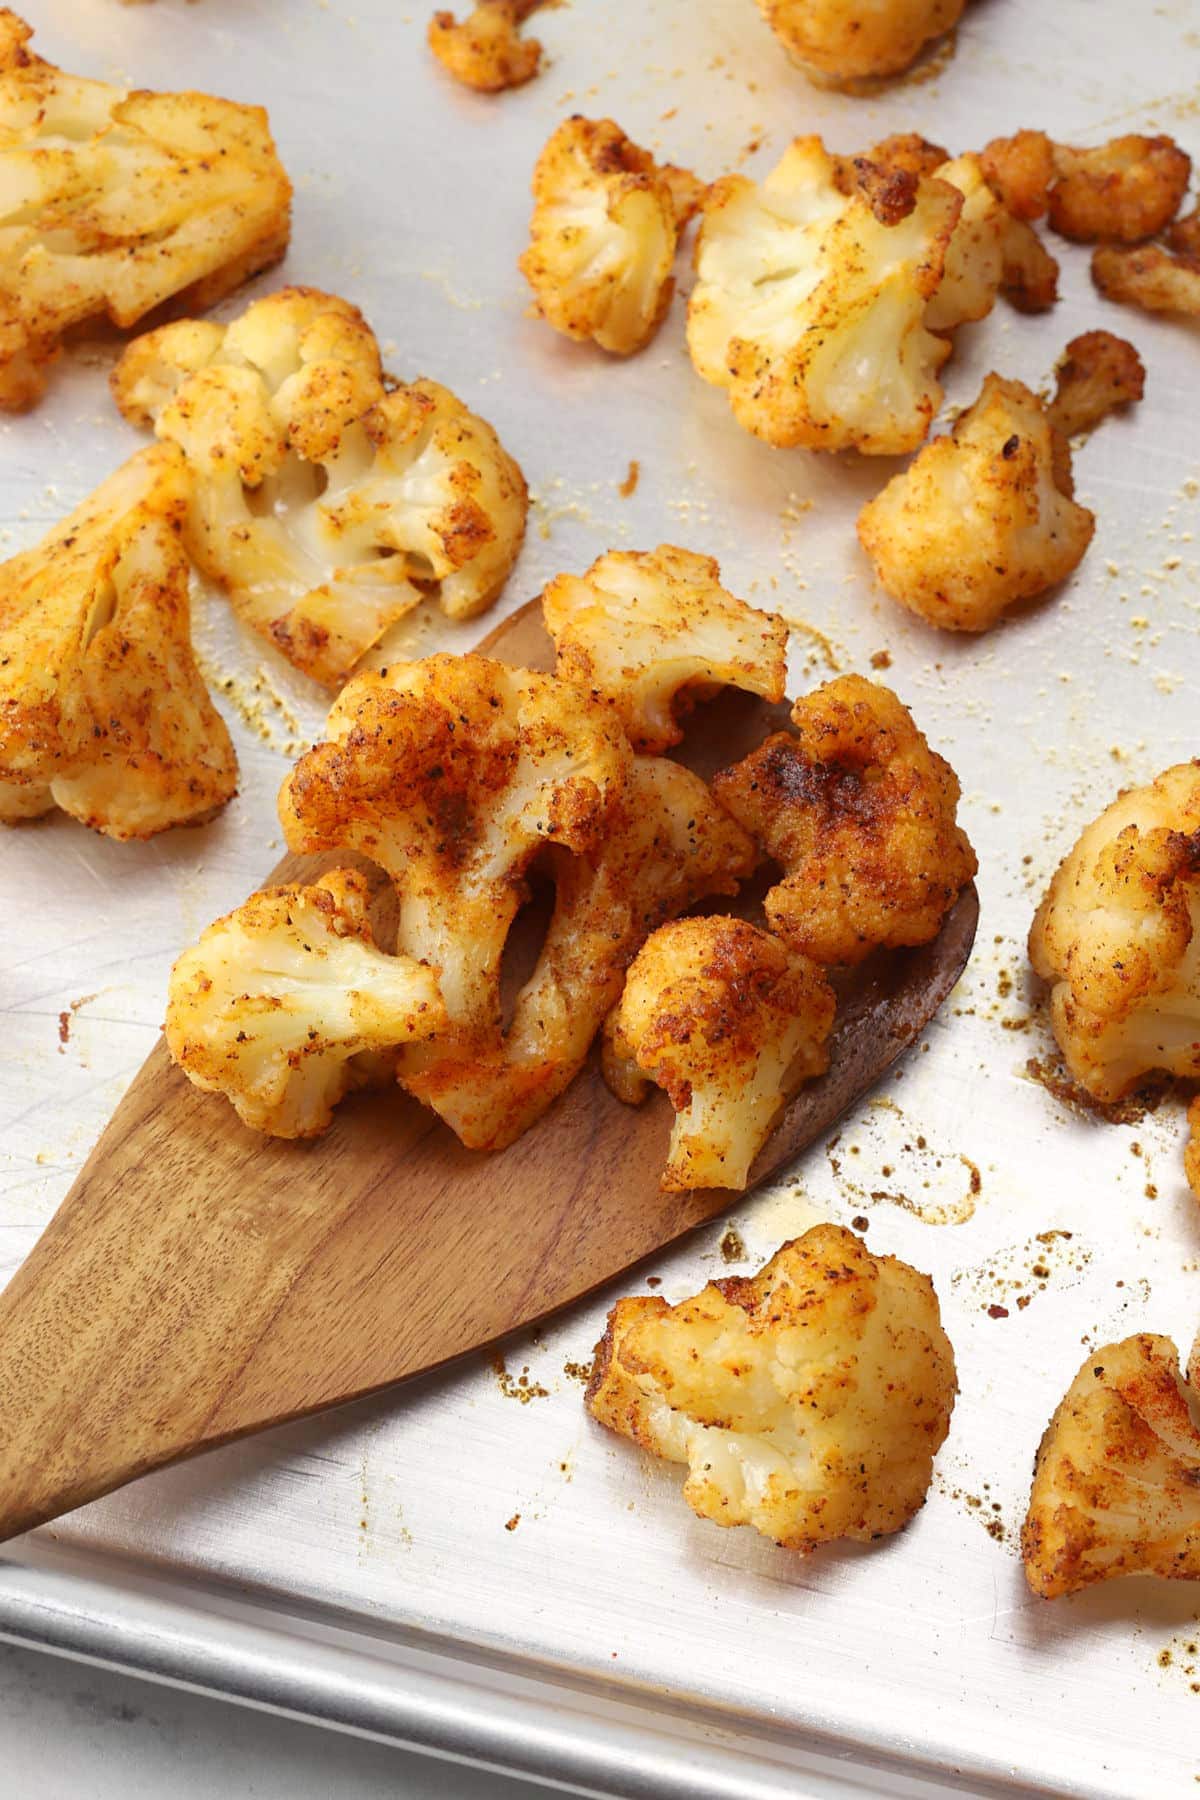 Wooden spatula scooping roasted cauliflower from a sheet pan.